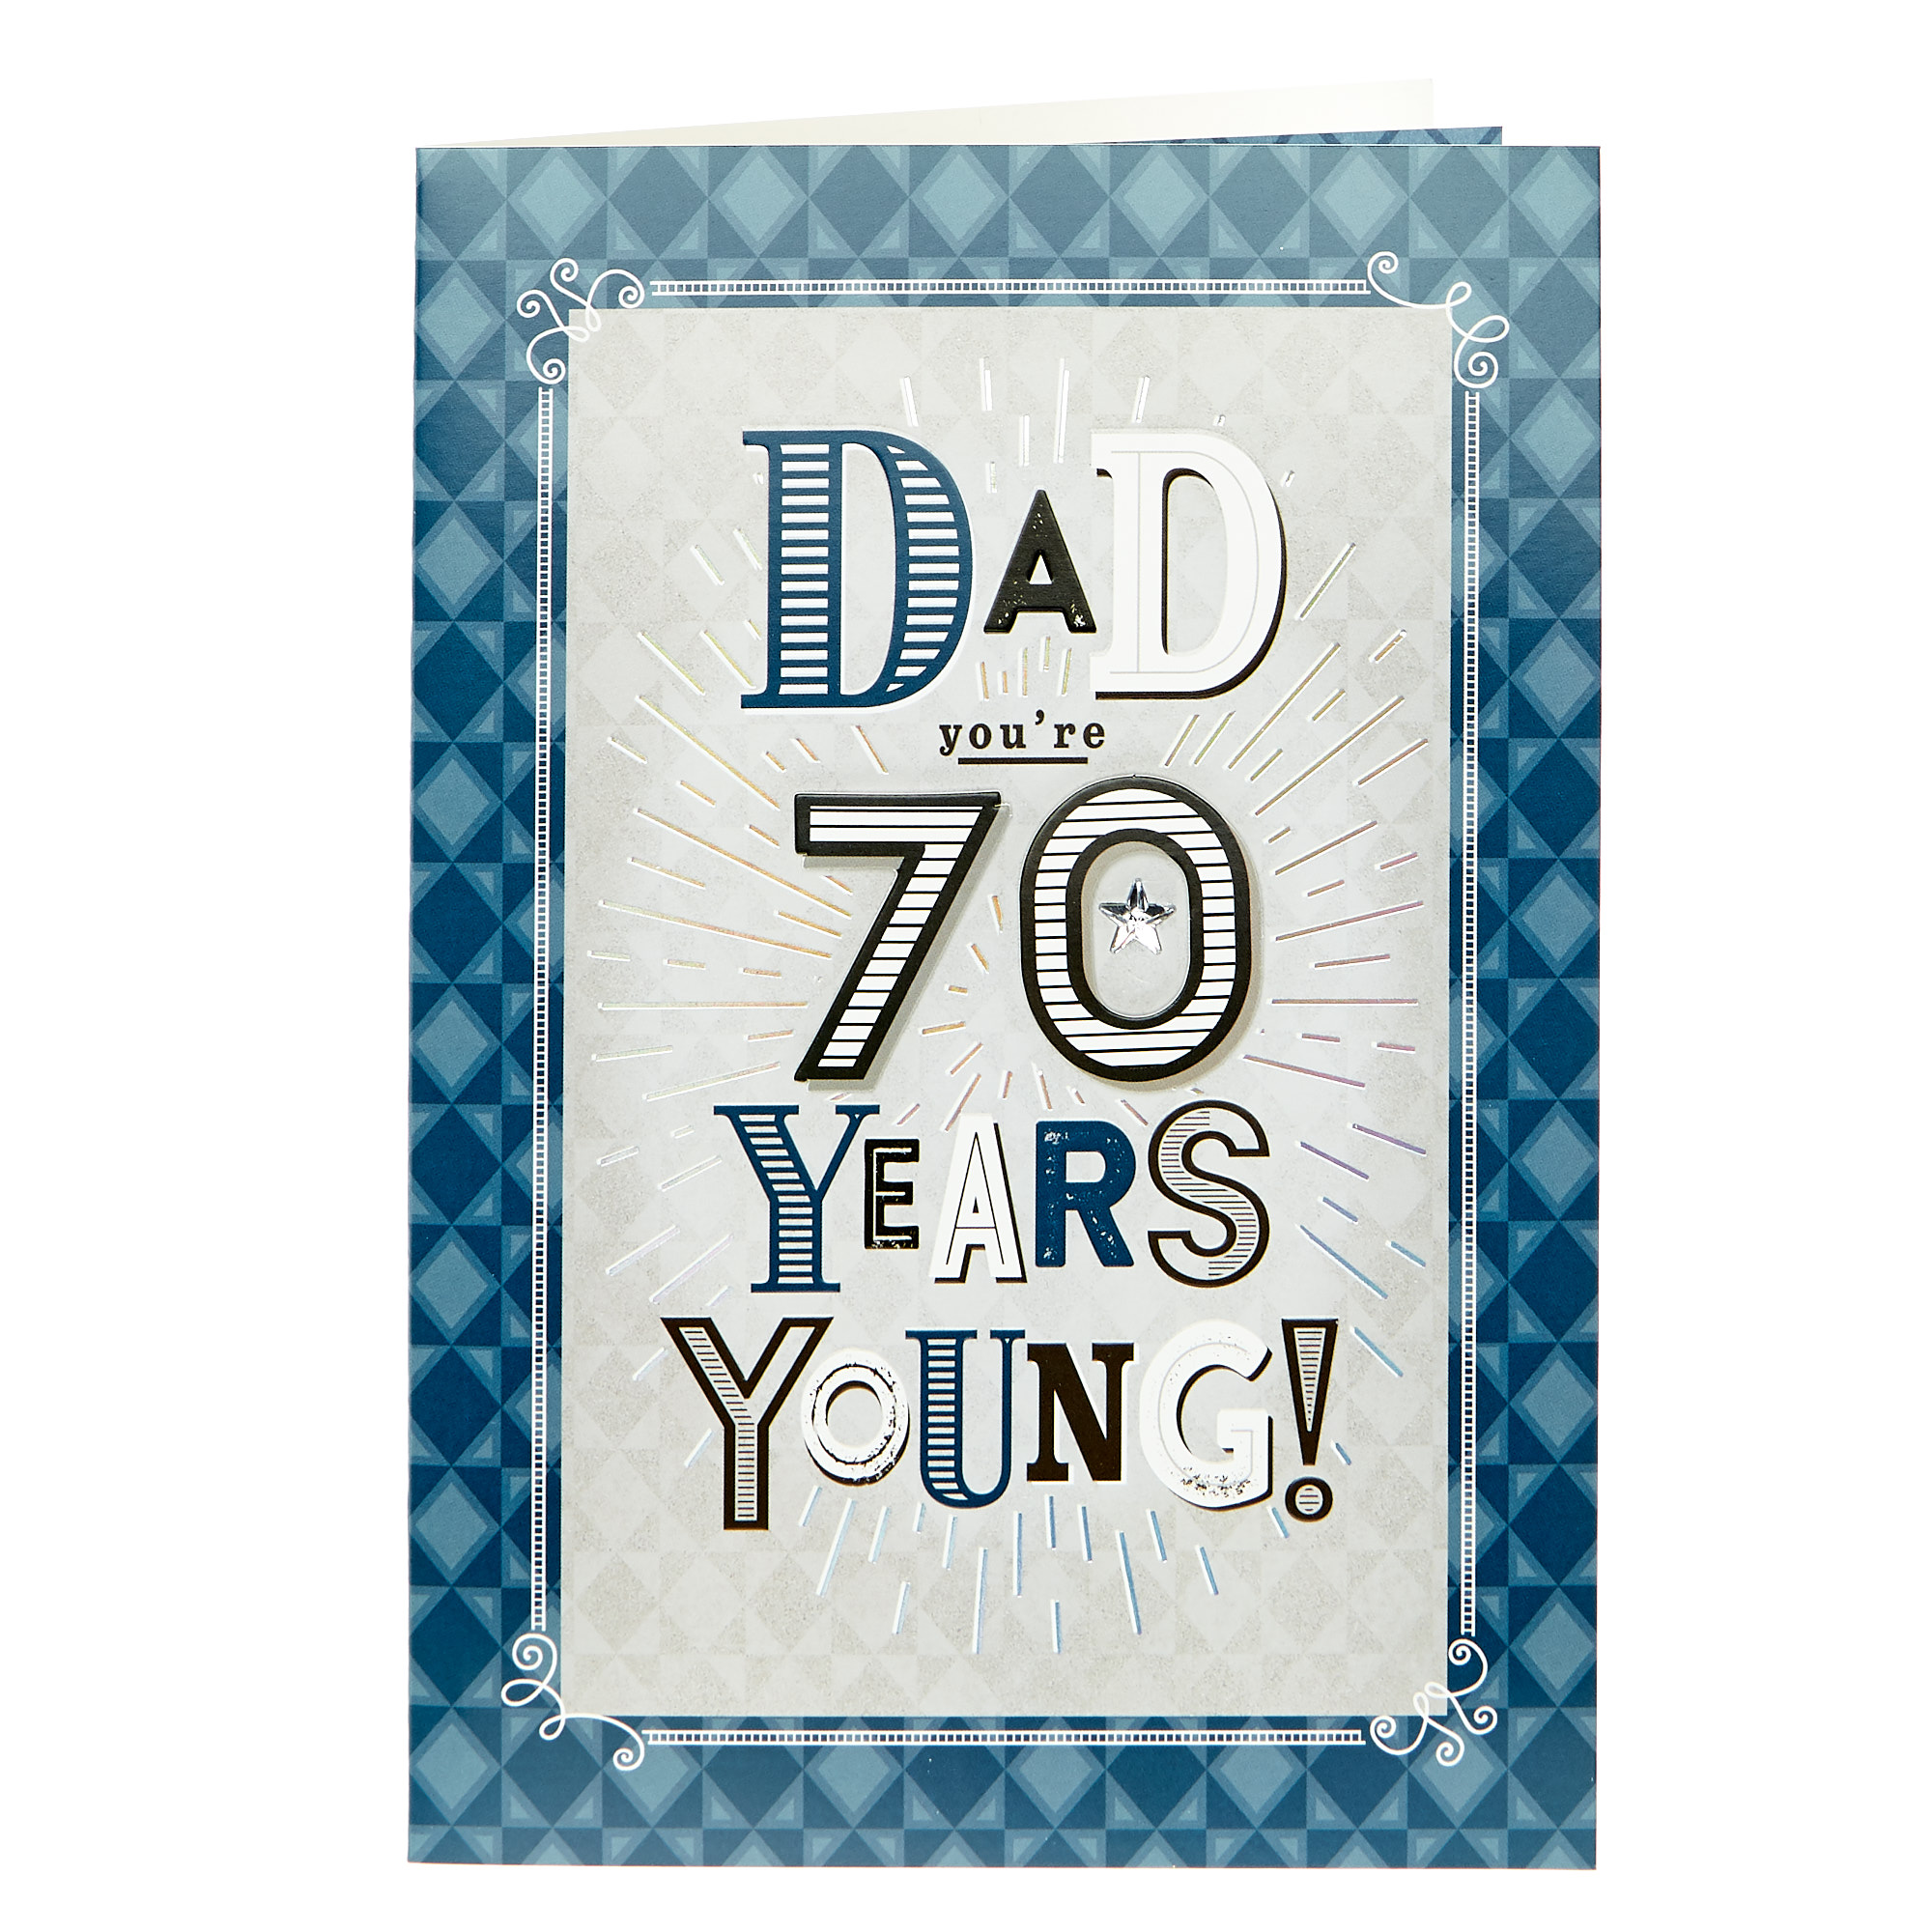 what to do for dad's 70th birthday